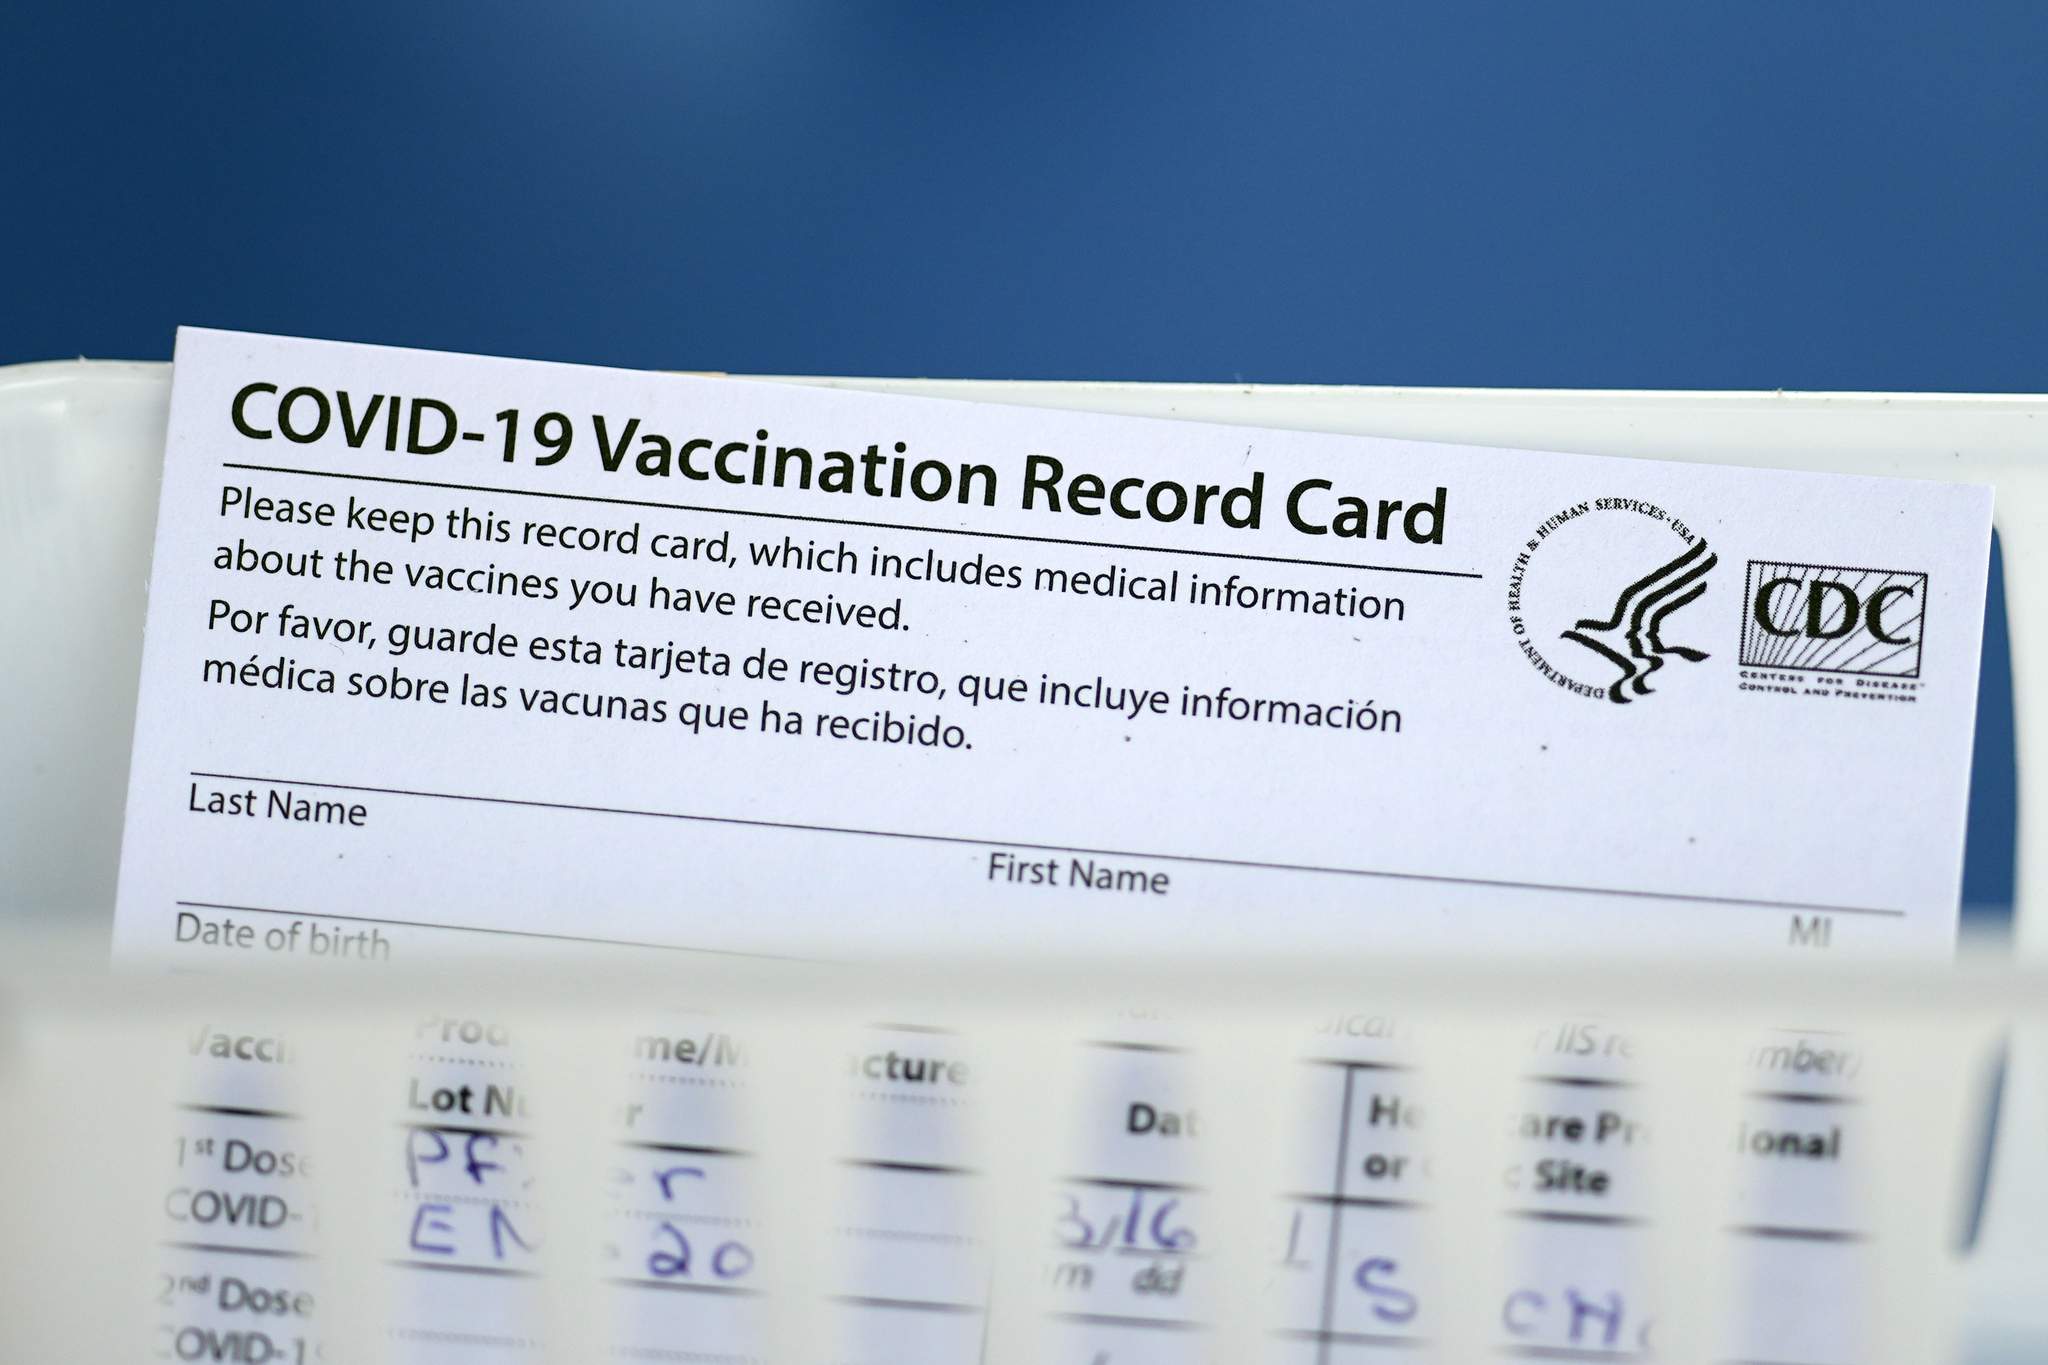 Staples will laminate your COVID-19 vaccine card for free